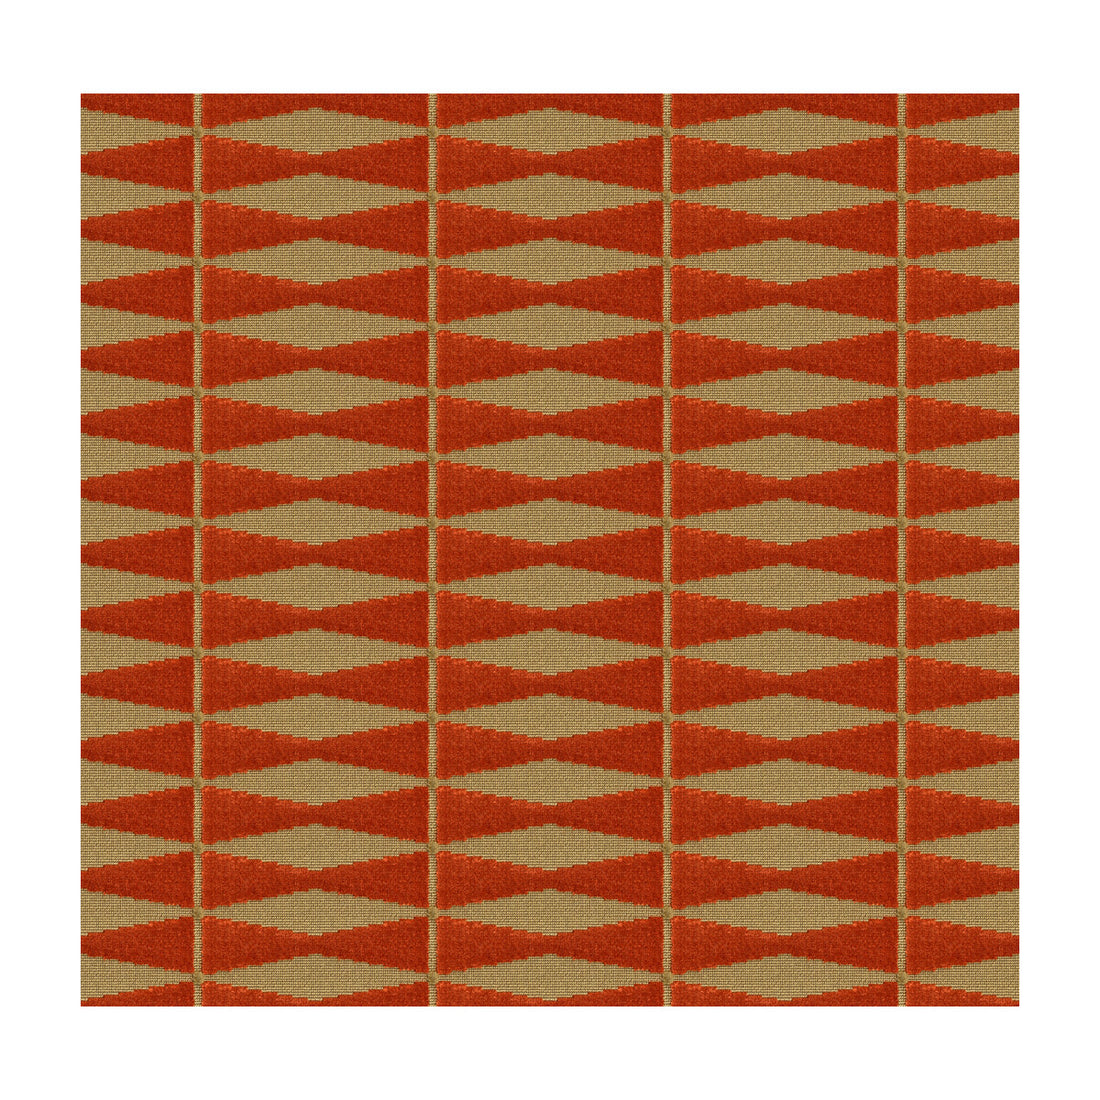 Skylark fabric in yam color - pattern 33648.12.0 - by Kravet Couture in the Michael Berman II Collection collection